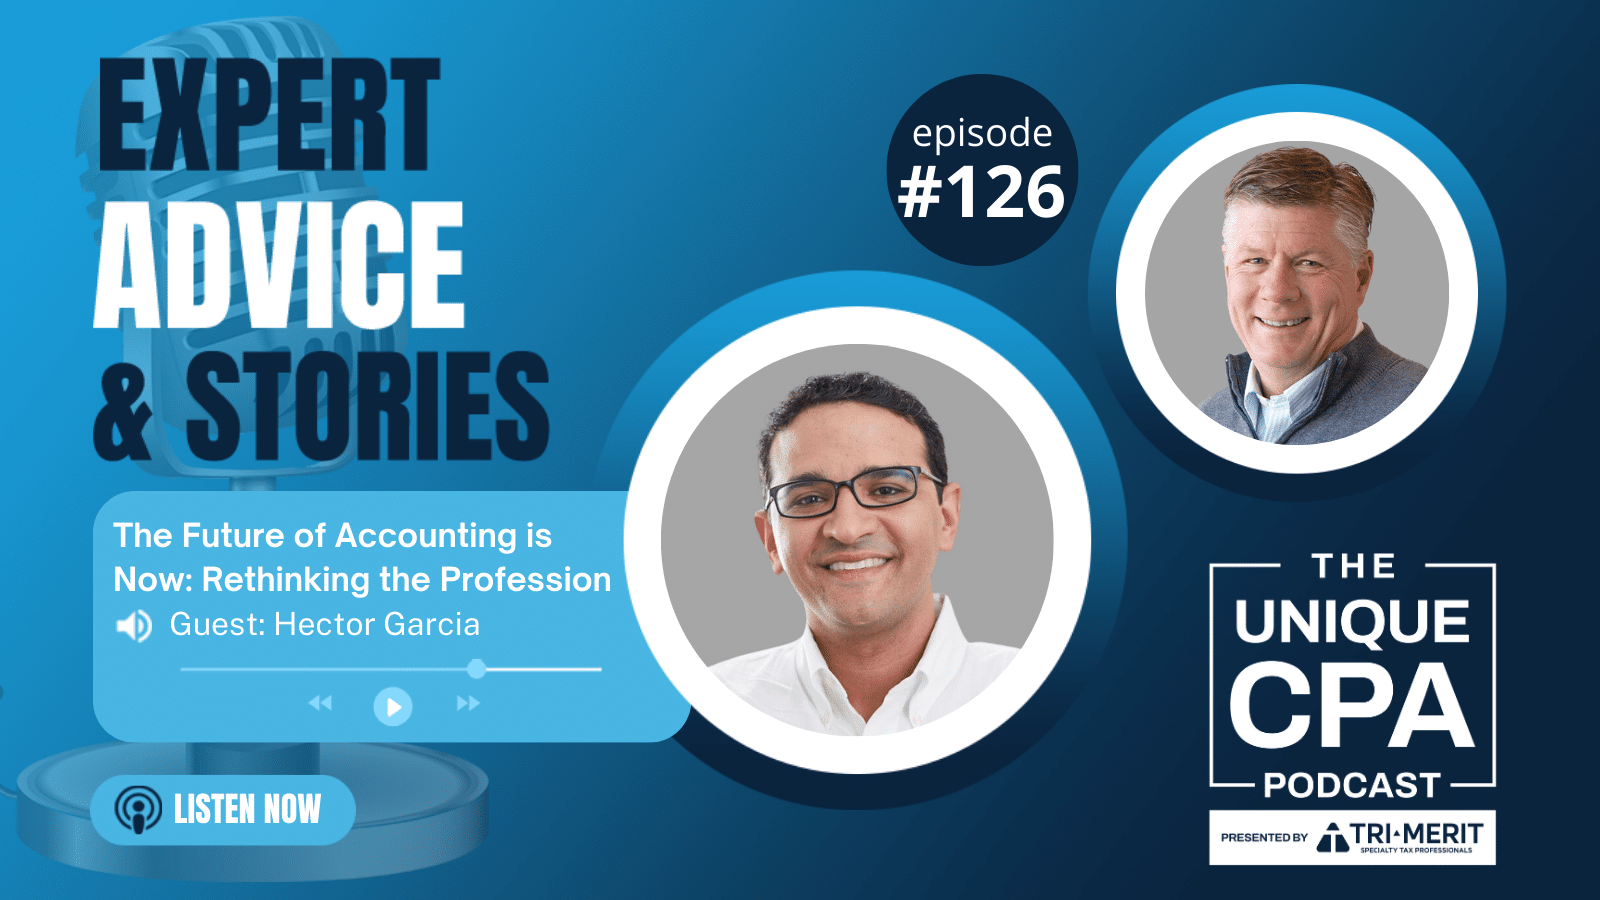 Unique Cpa Featured Image Ep 126 Hector Garcia - The Future Of Accounting Is Now - Tri-Merit